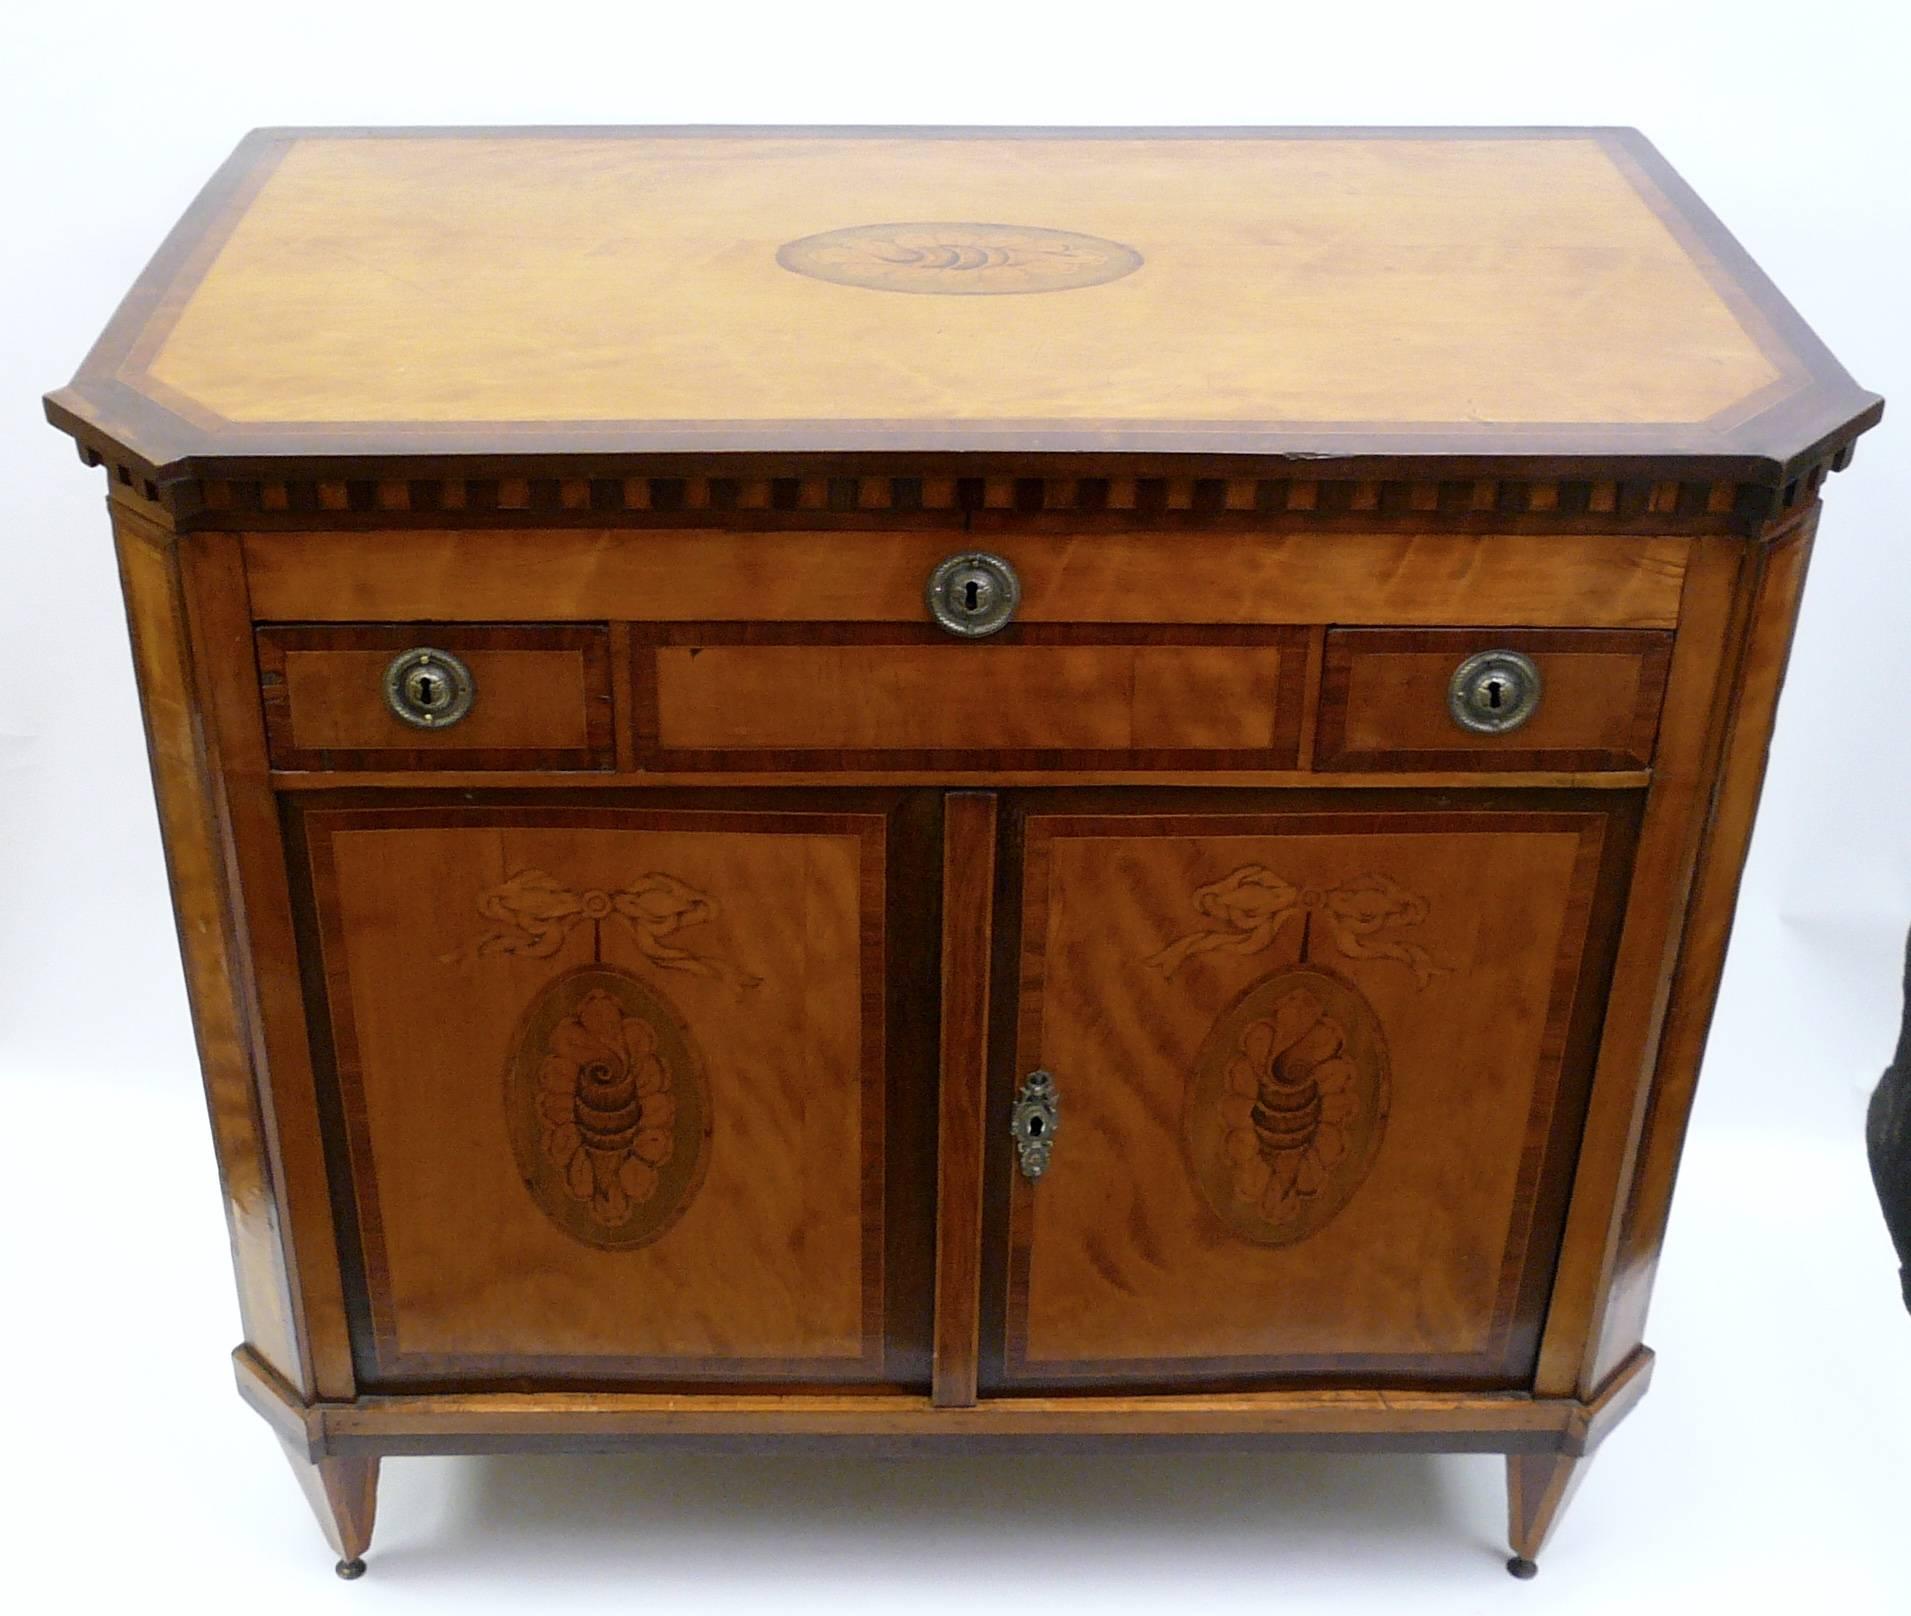 Fine Early 19th Century Dutch Inlay Commode or Klapbuffet For Sale 2